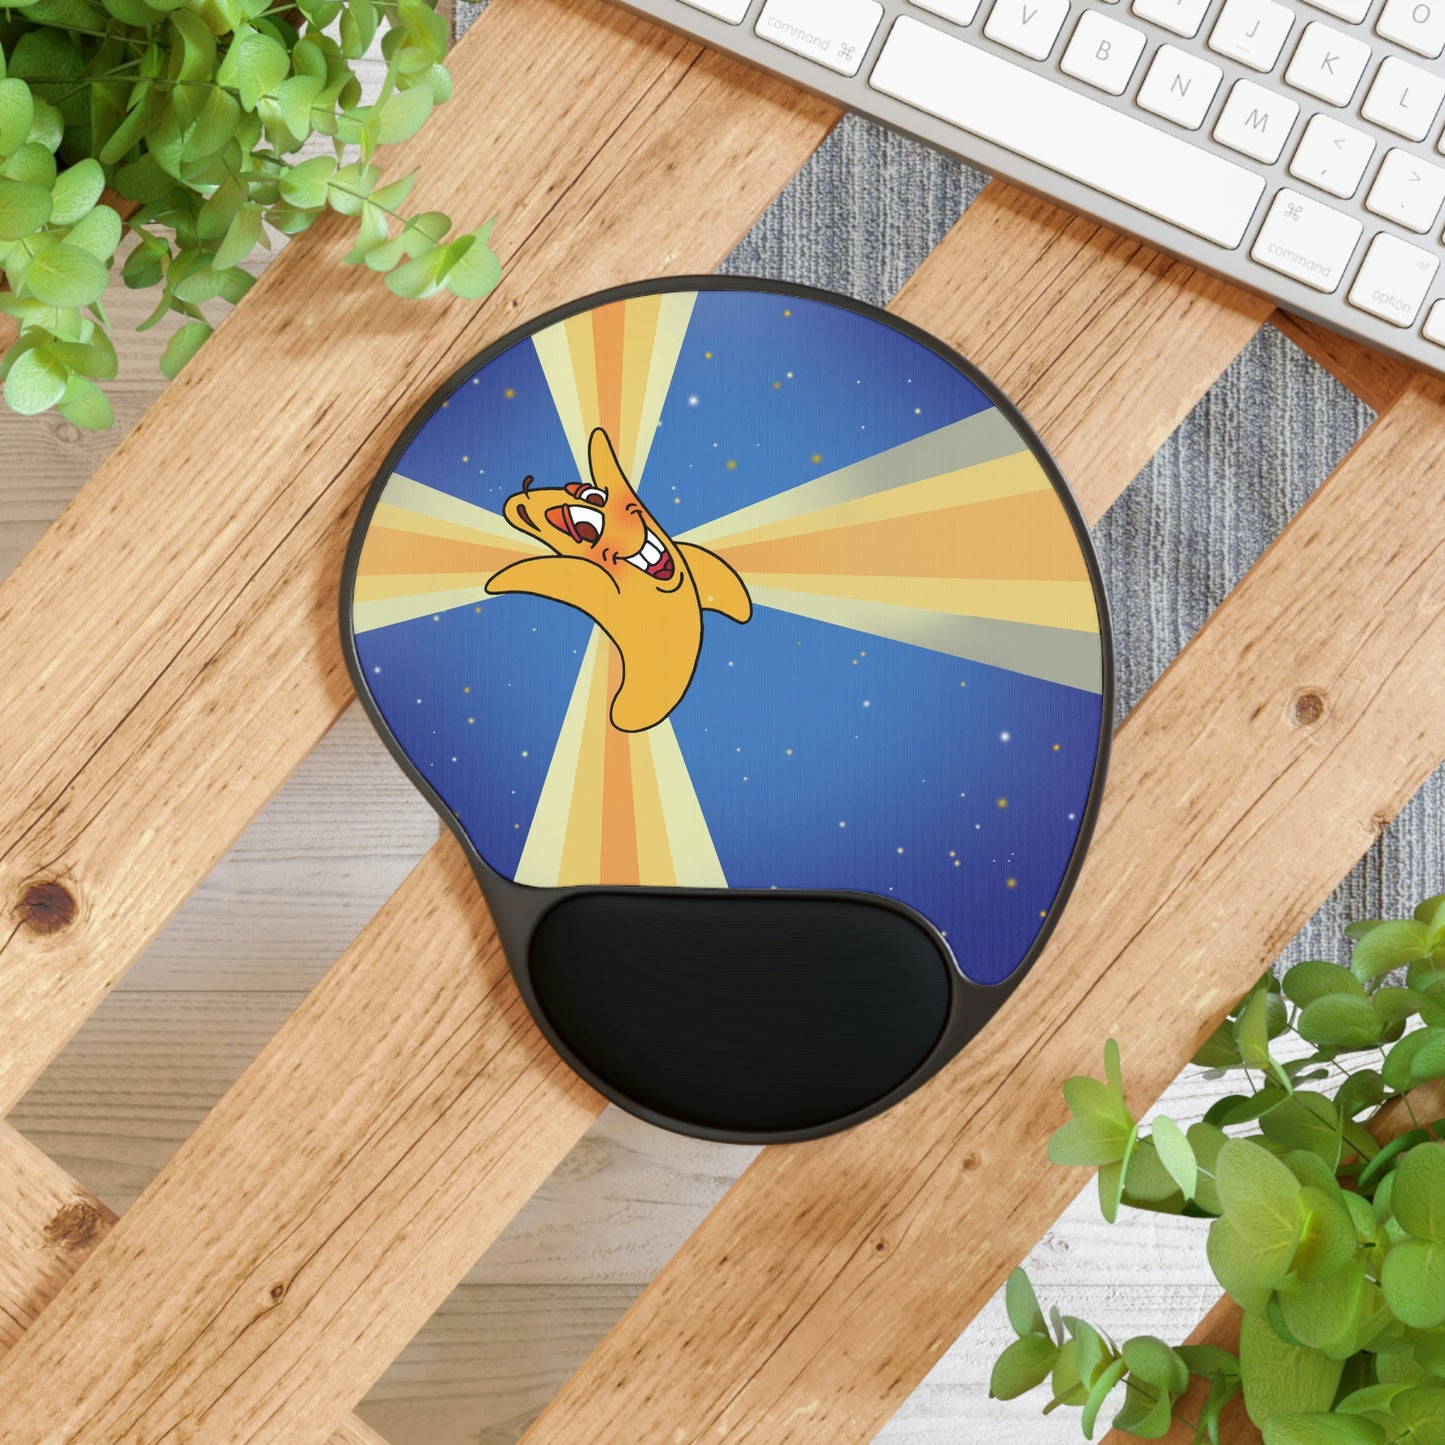 Pick Me Cried Arilla Mouse Pad With Wrist Rest